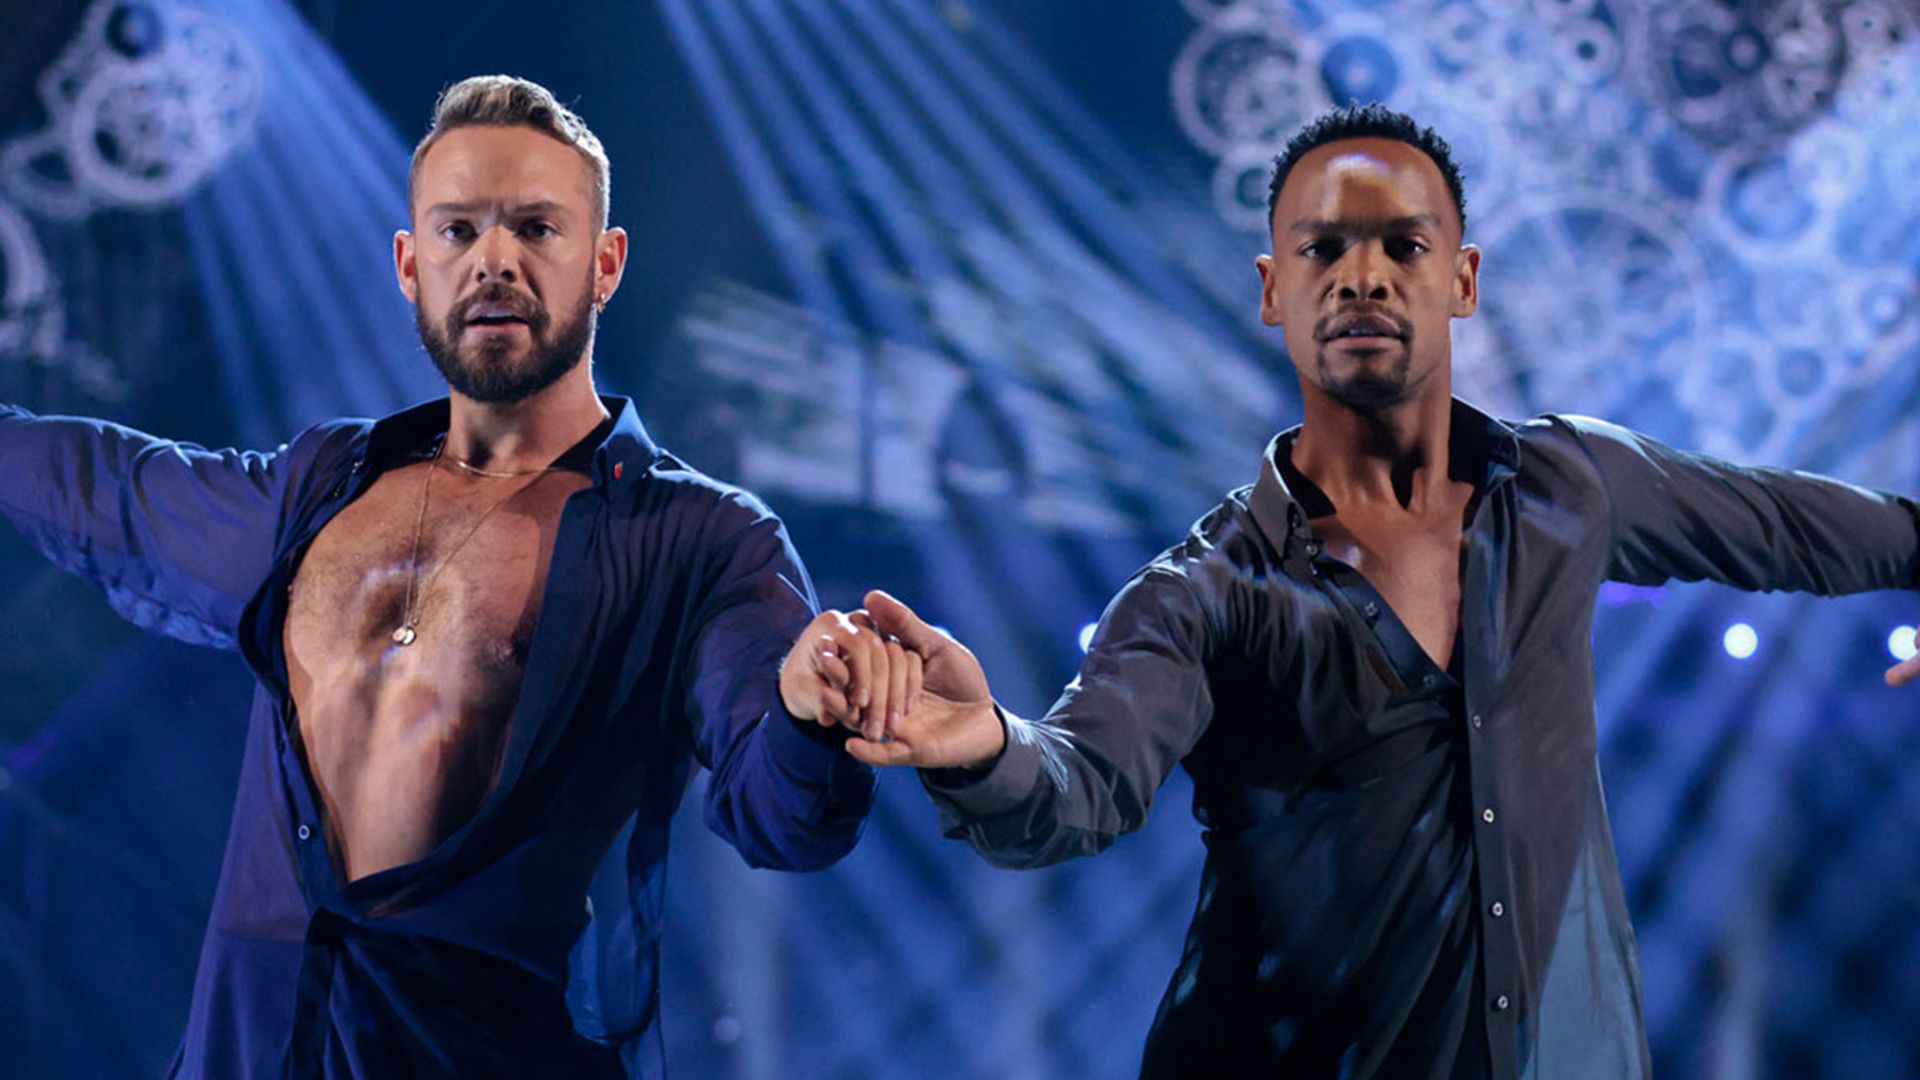 Strictly fans left in tears following 'emotional' same-sex dance